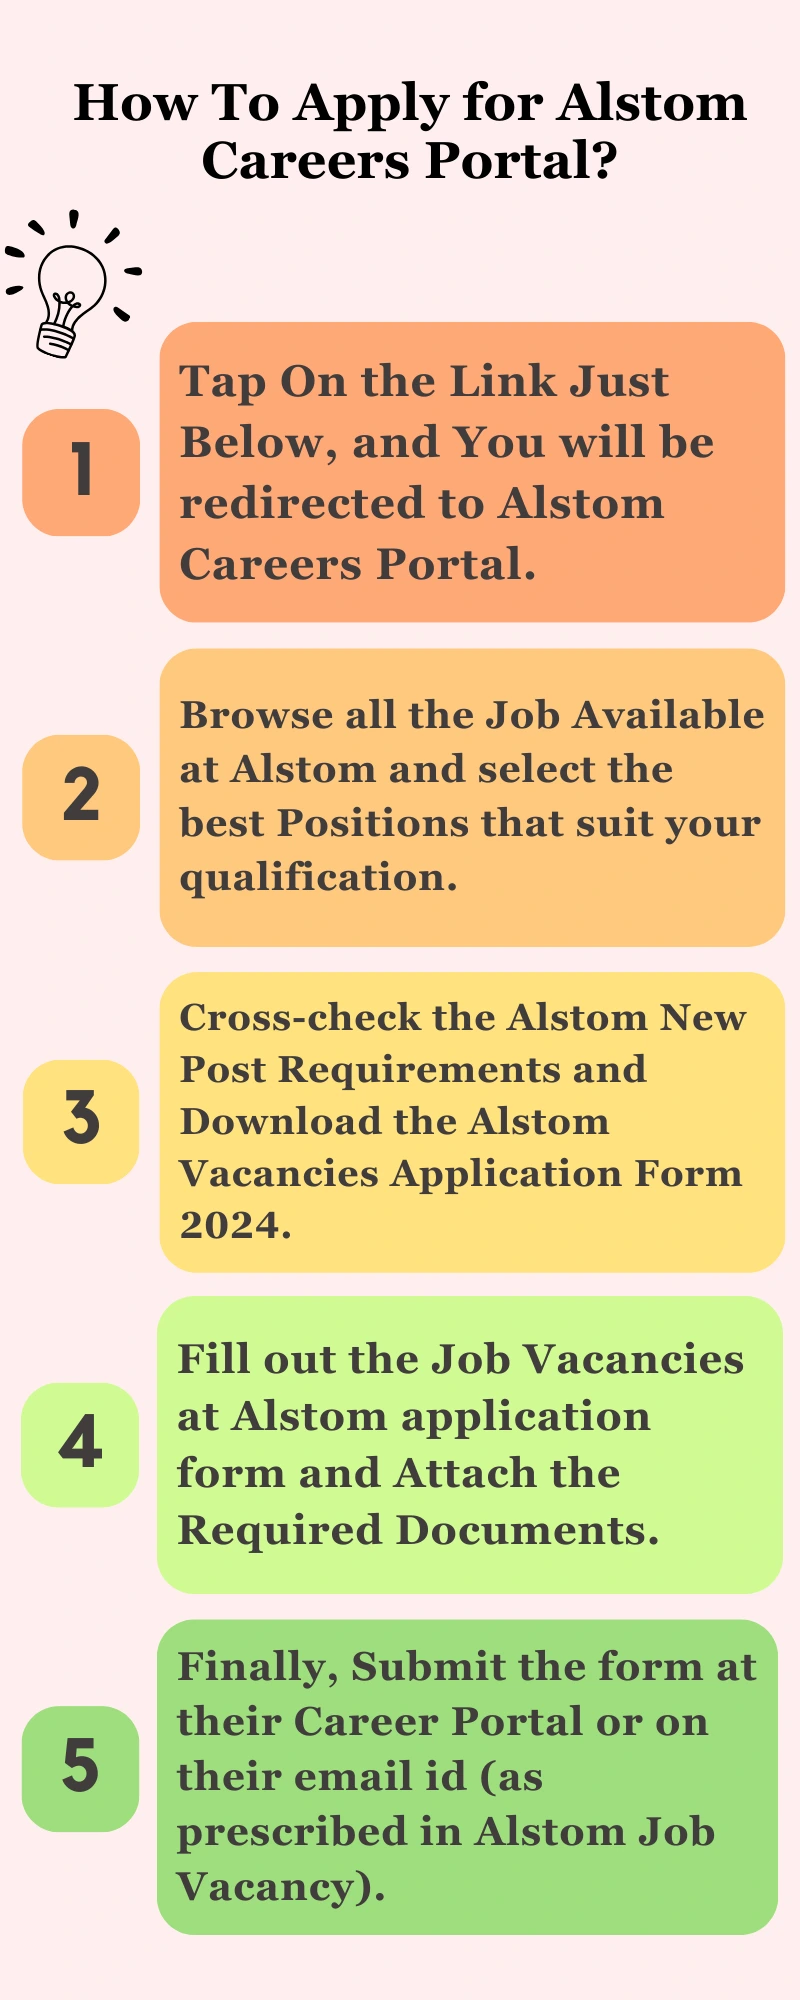 How To Apply for Alstom Careers Portal?